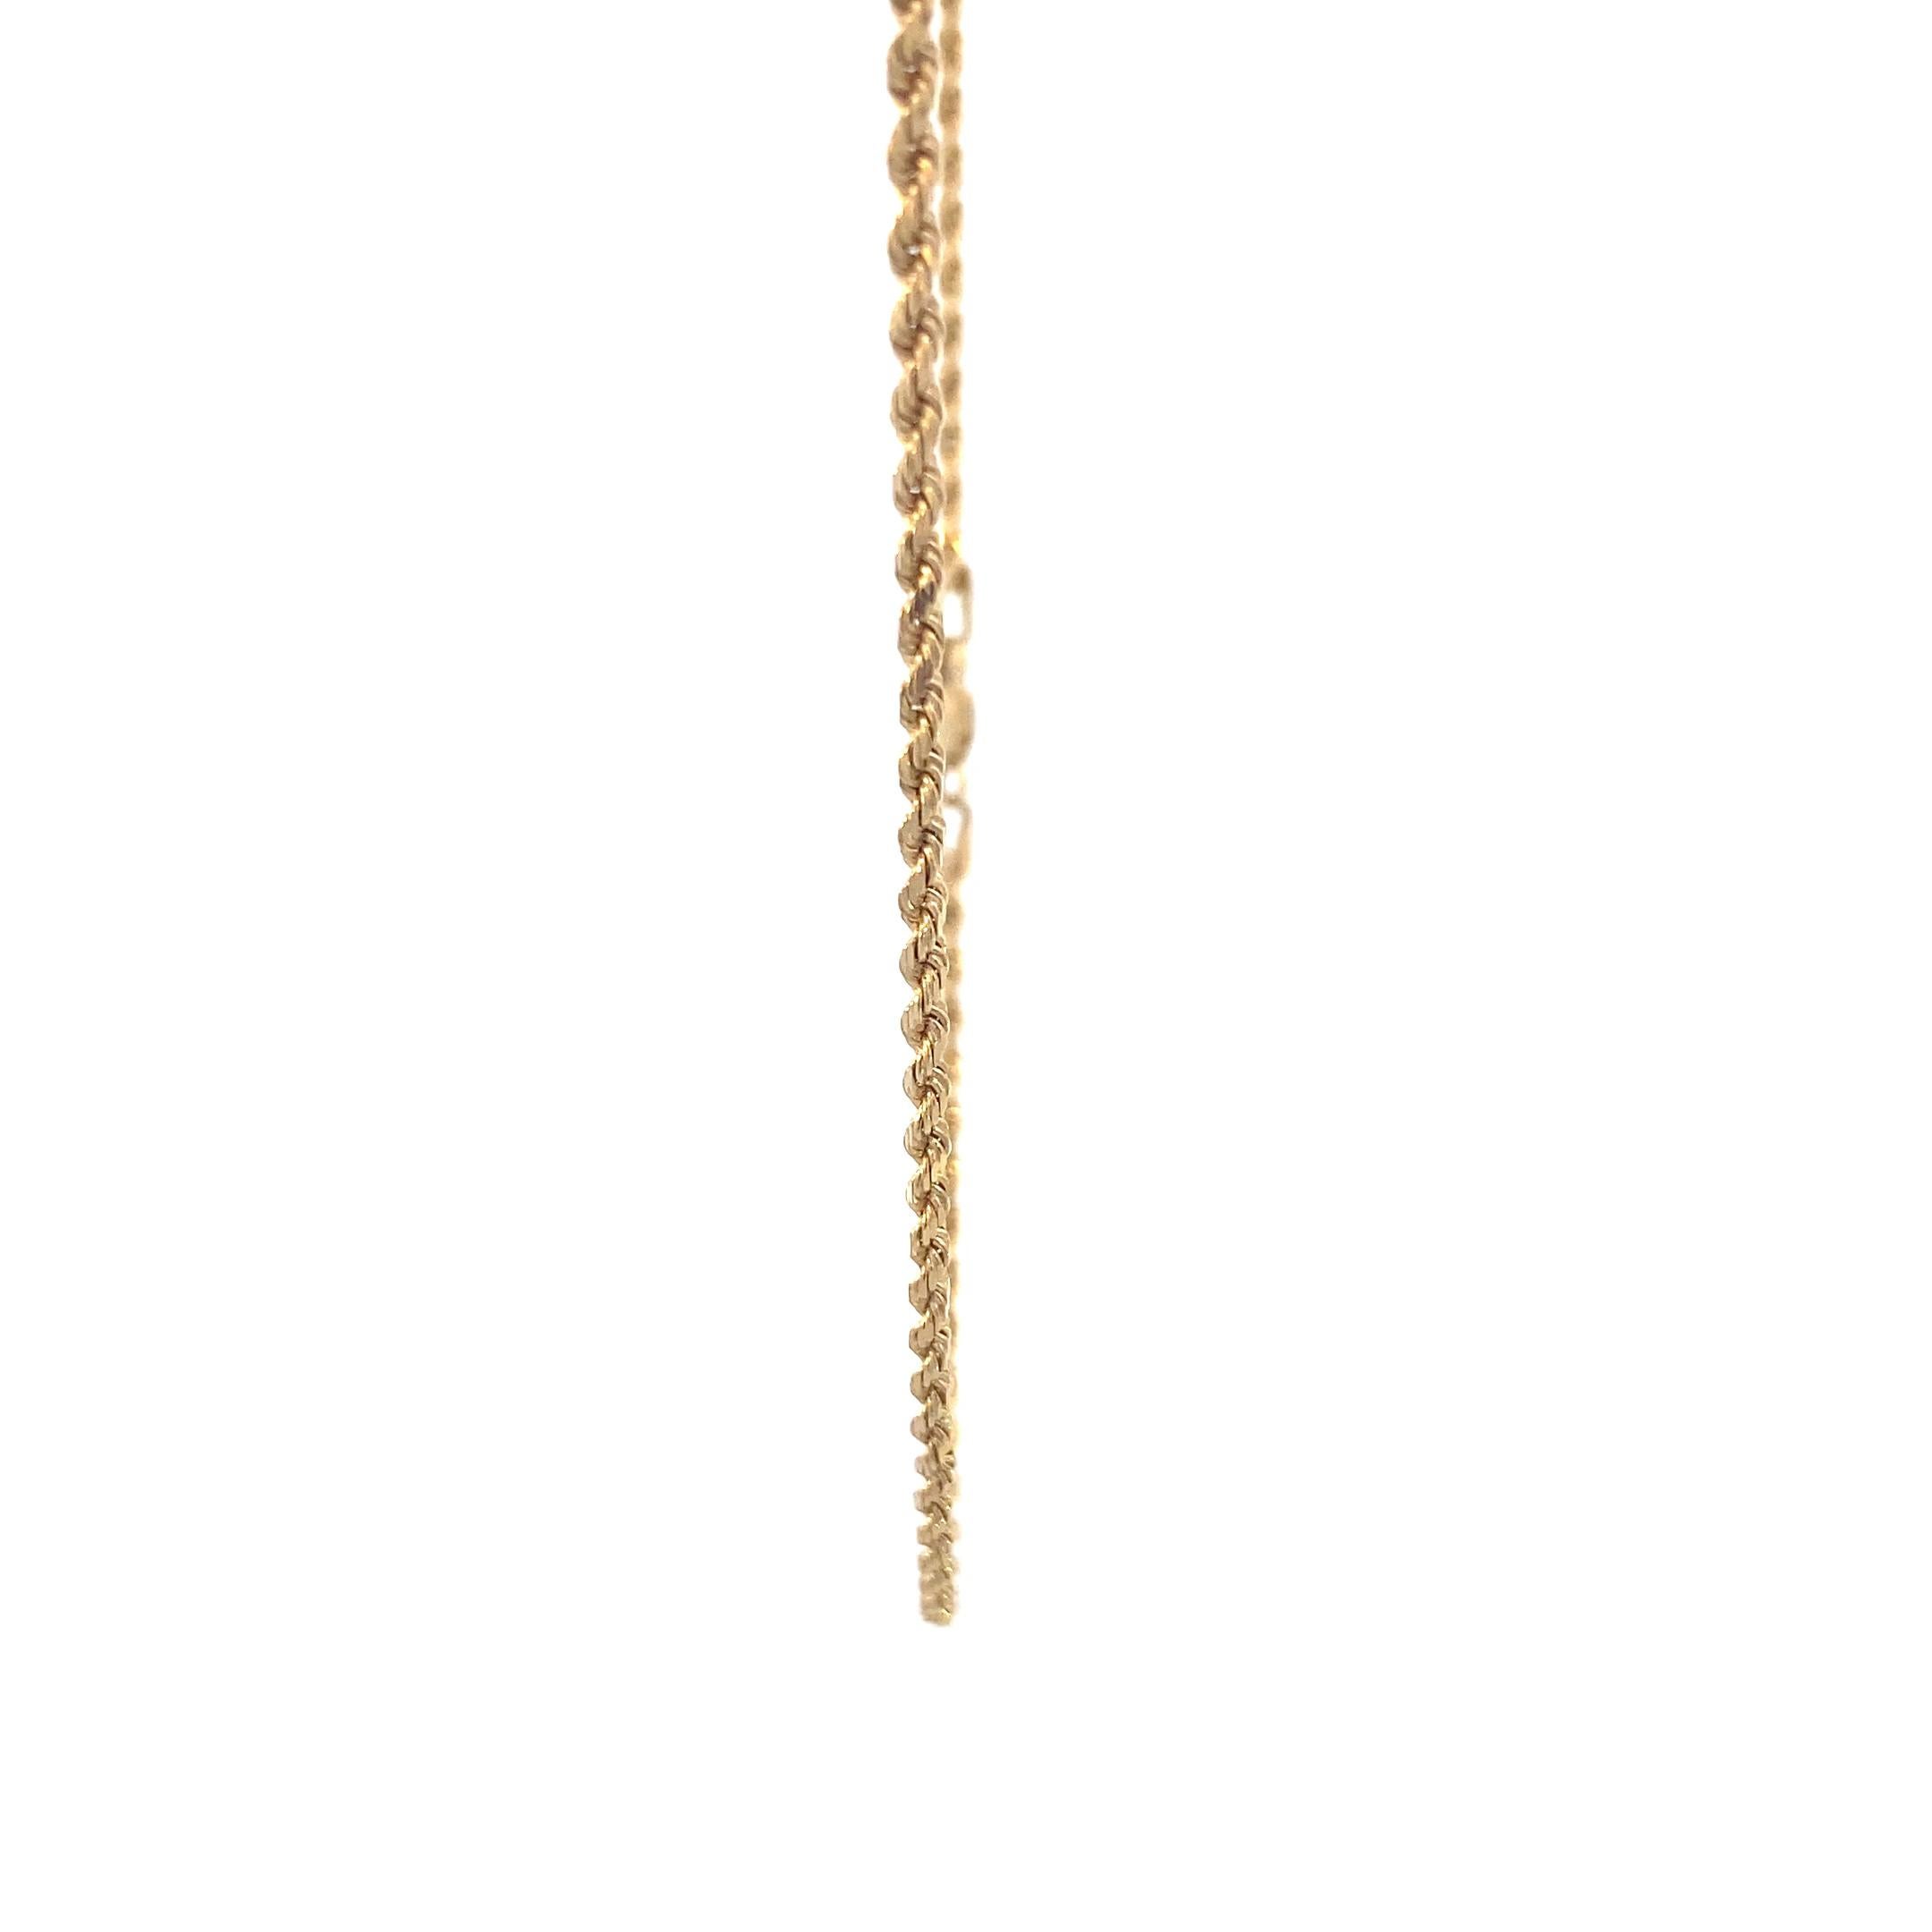 Inventory number: EL1059254

The 14k Yellow Gold 1mm Wide Rope Chain is a captivating piece that holds broad appeal for jewelry enthusiasts and buyers alike. Here are some key points that make it particularly interesting to potential